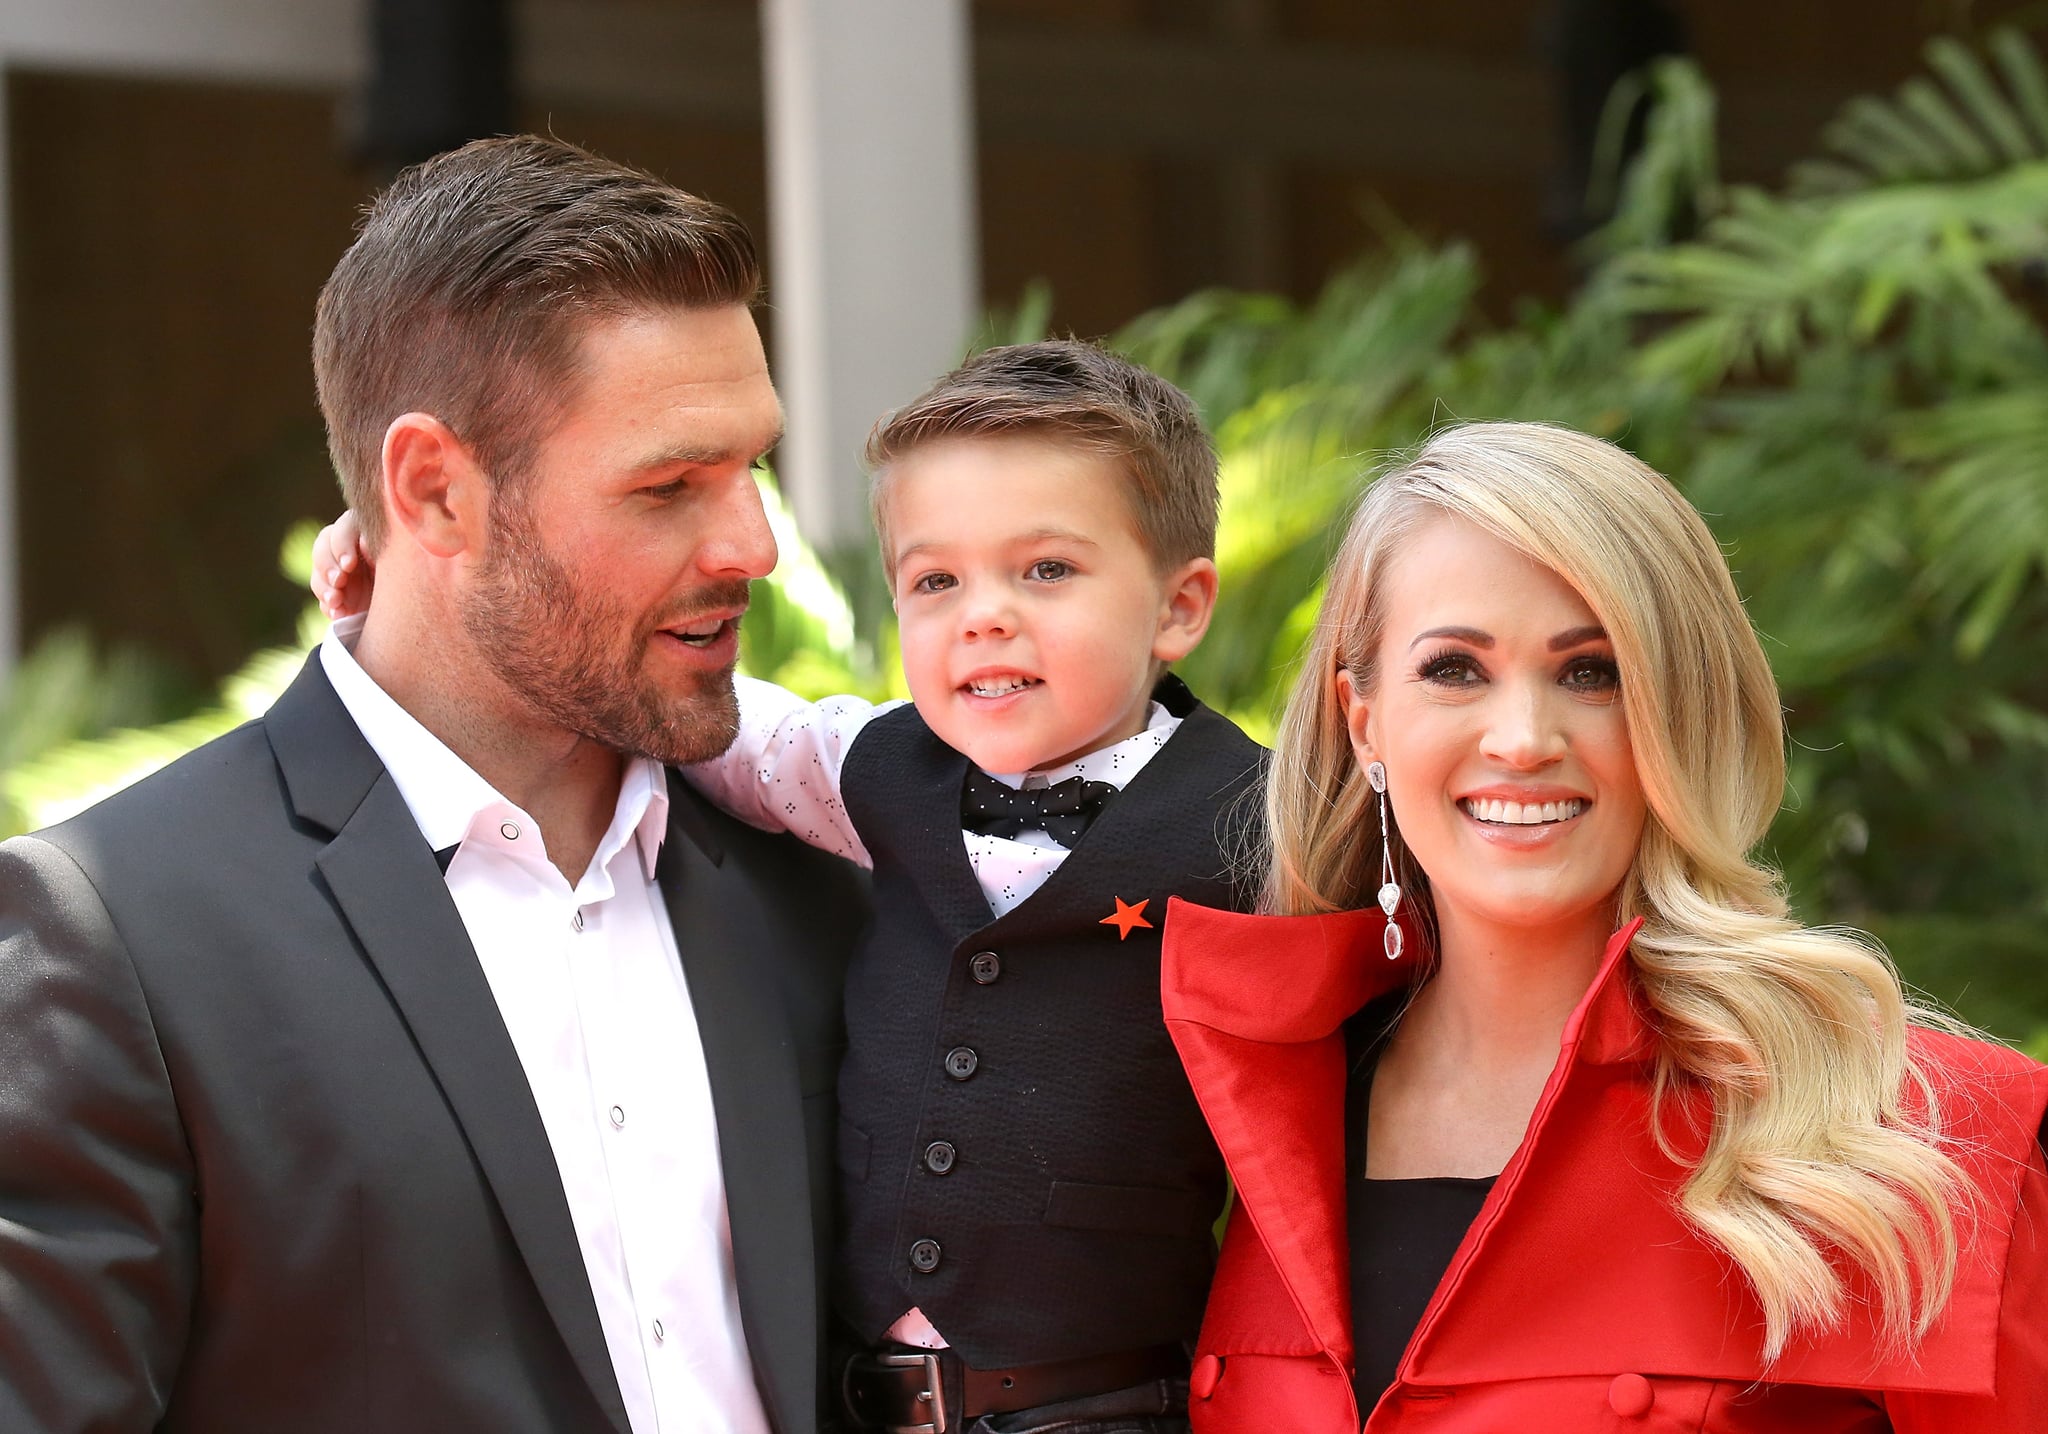 HOLLYWOOD, CA - SEPTEMBER 20:  Carrie Underwood with her husband, Mike Fisher and their son, Isaiah Michael Fisher attend the ceremony honouring Carrie Underwood with a Star on The Hollywood Walk of Fame held on September 20, 2018 in Hollywood, California.  (Photo by Michael Tran/FilmMagic,)